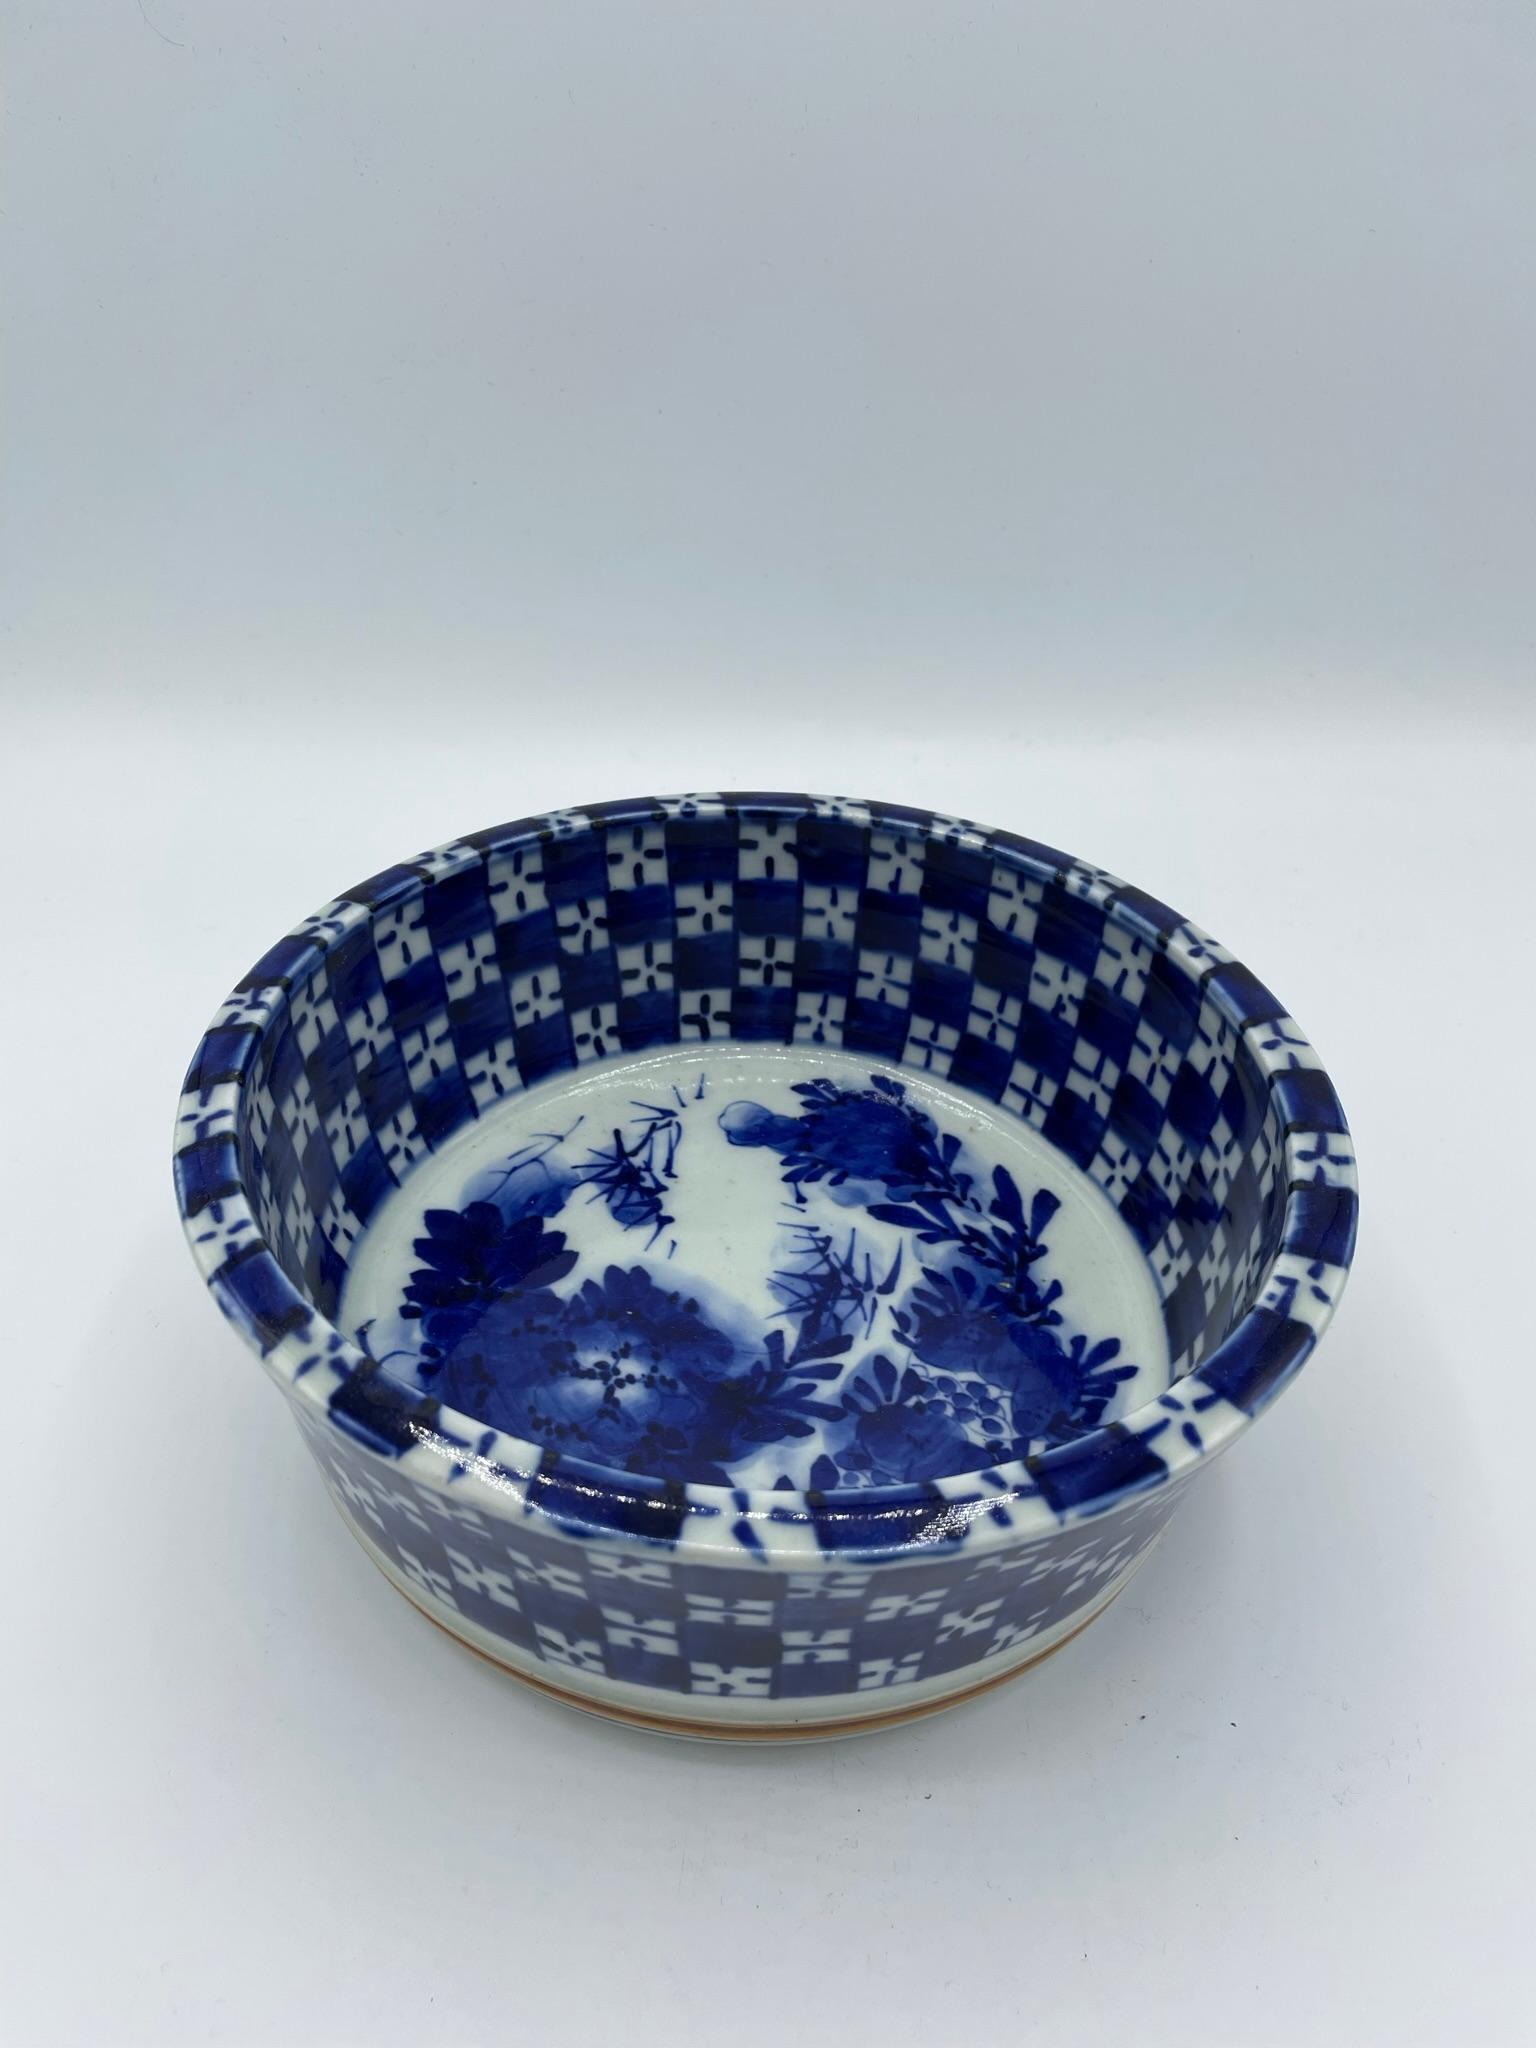 This is a bowl made in Japan around 1920s in Taisho era.
It can use as a food bowl but also as a flower vase.
The colour is blue and white, on the bottom is brown.
It is hand painted and a beautiful piece.

Dimensions:
H7.5 x 18.4 x 18.4 cm.